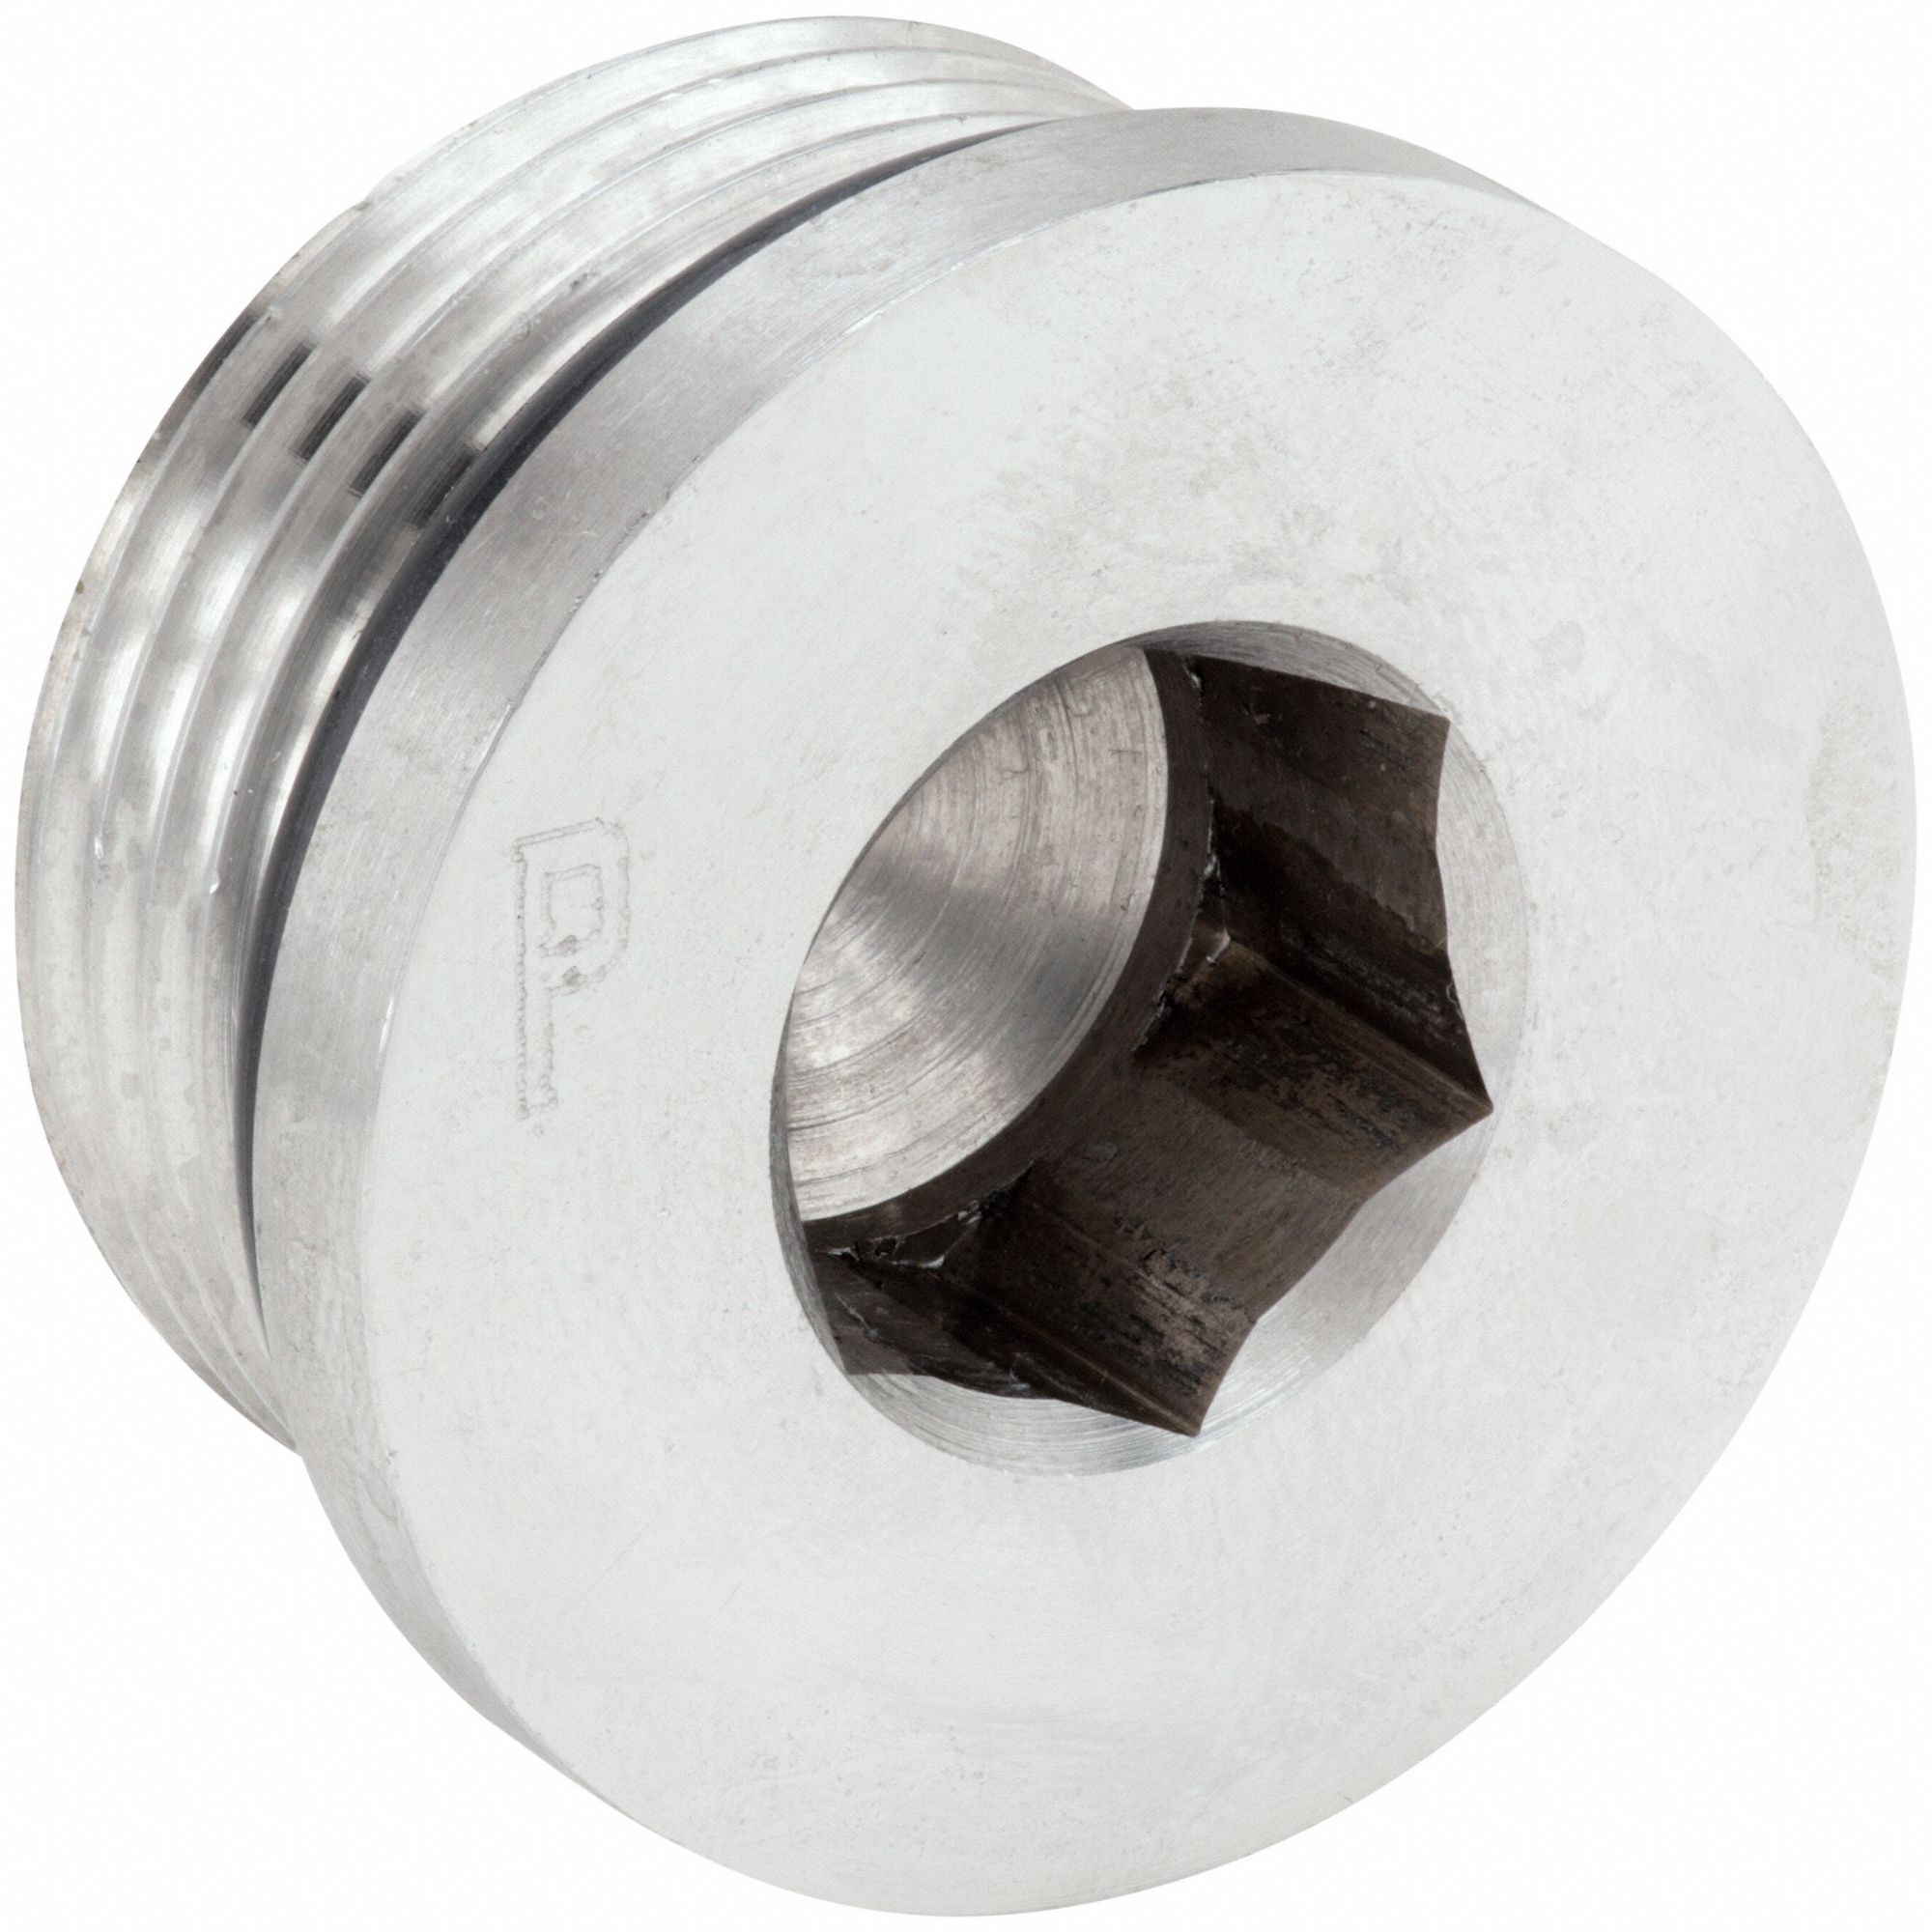 316 Stainless Steel, 1 in Fitting Pipe Size, Hollow Hex Plug - 60UW70 ...